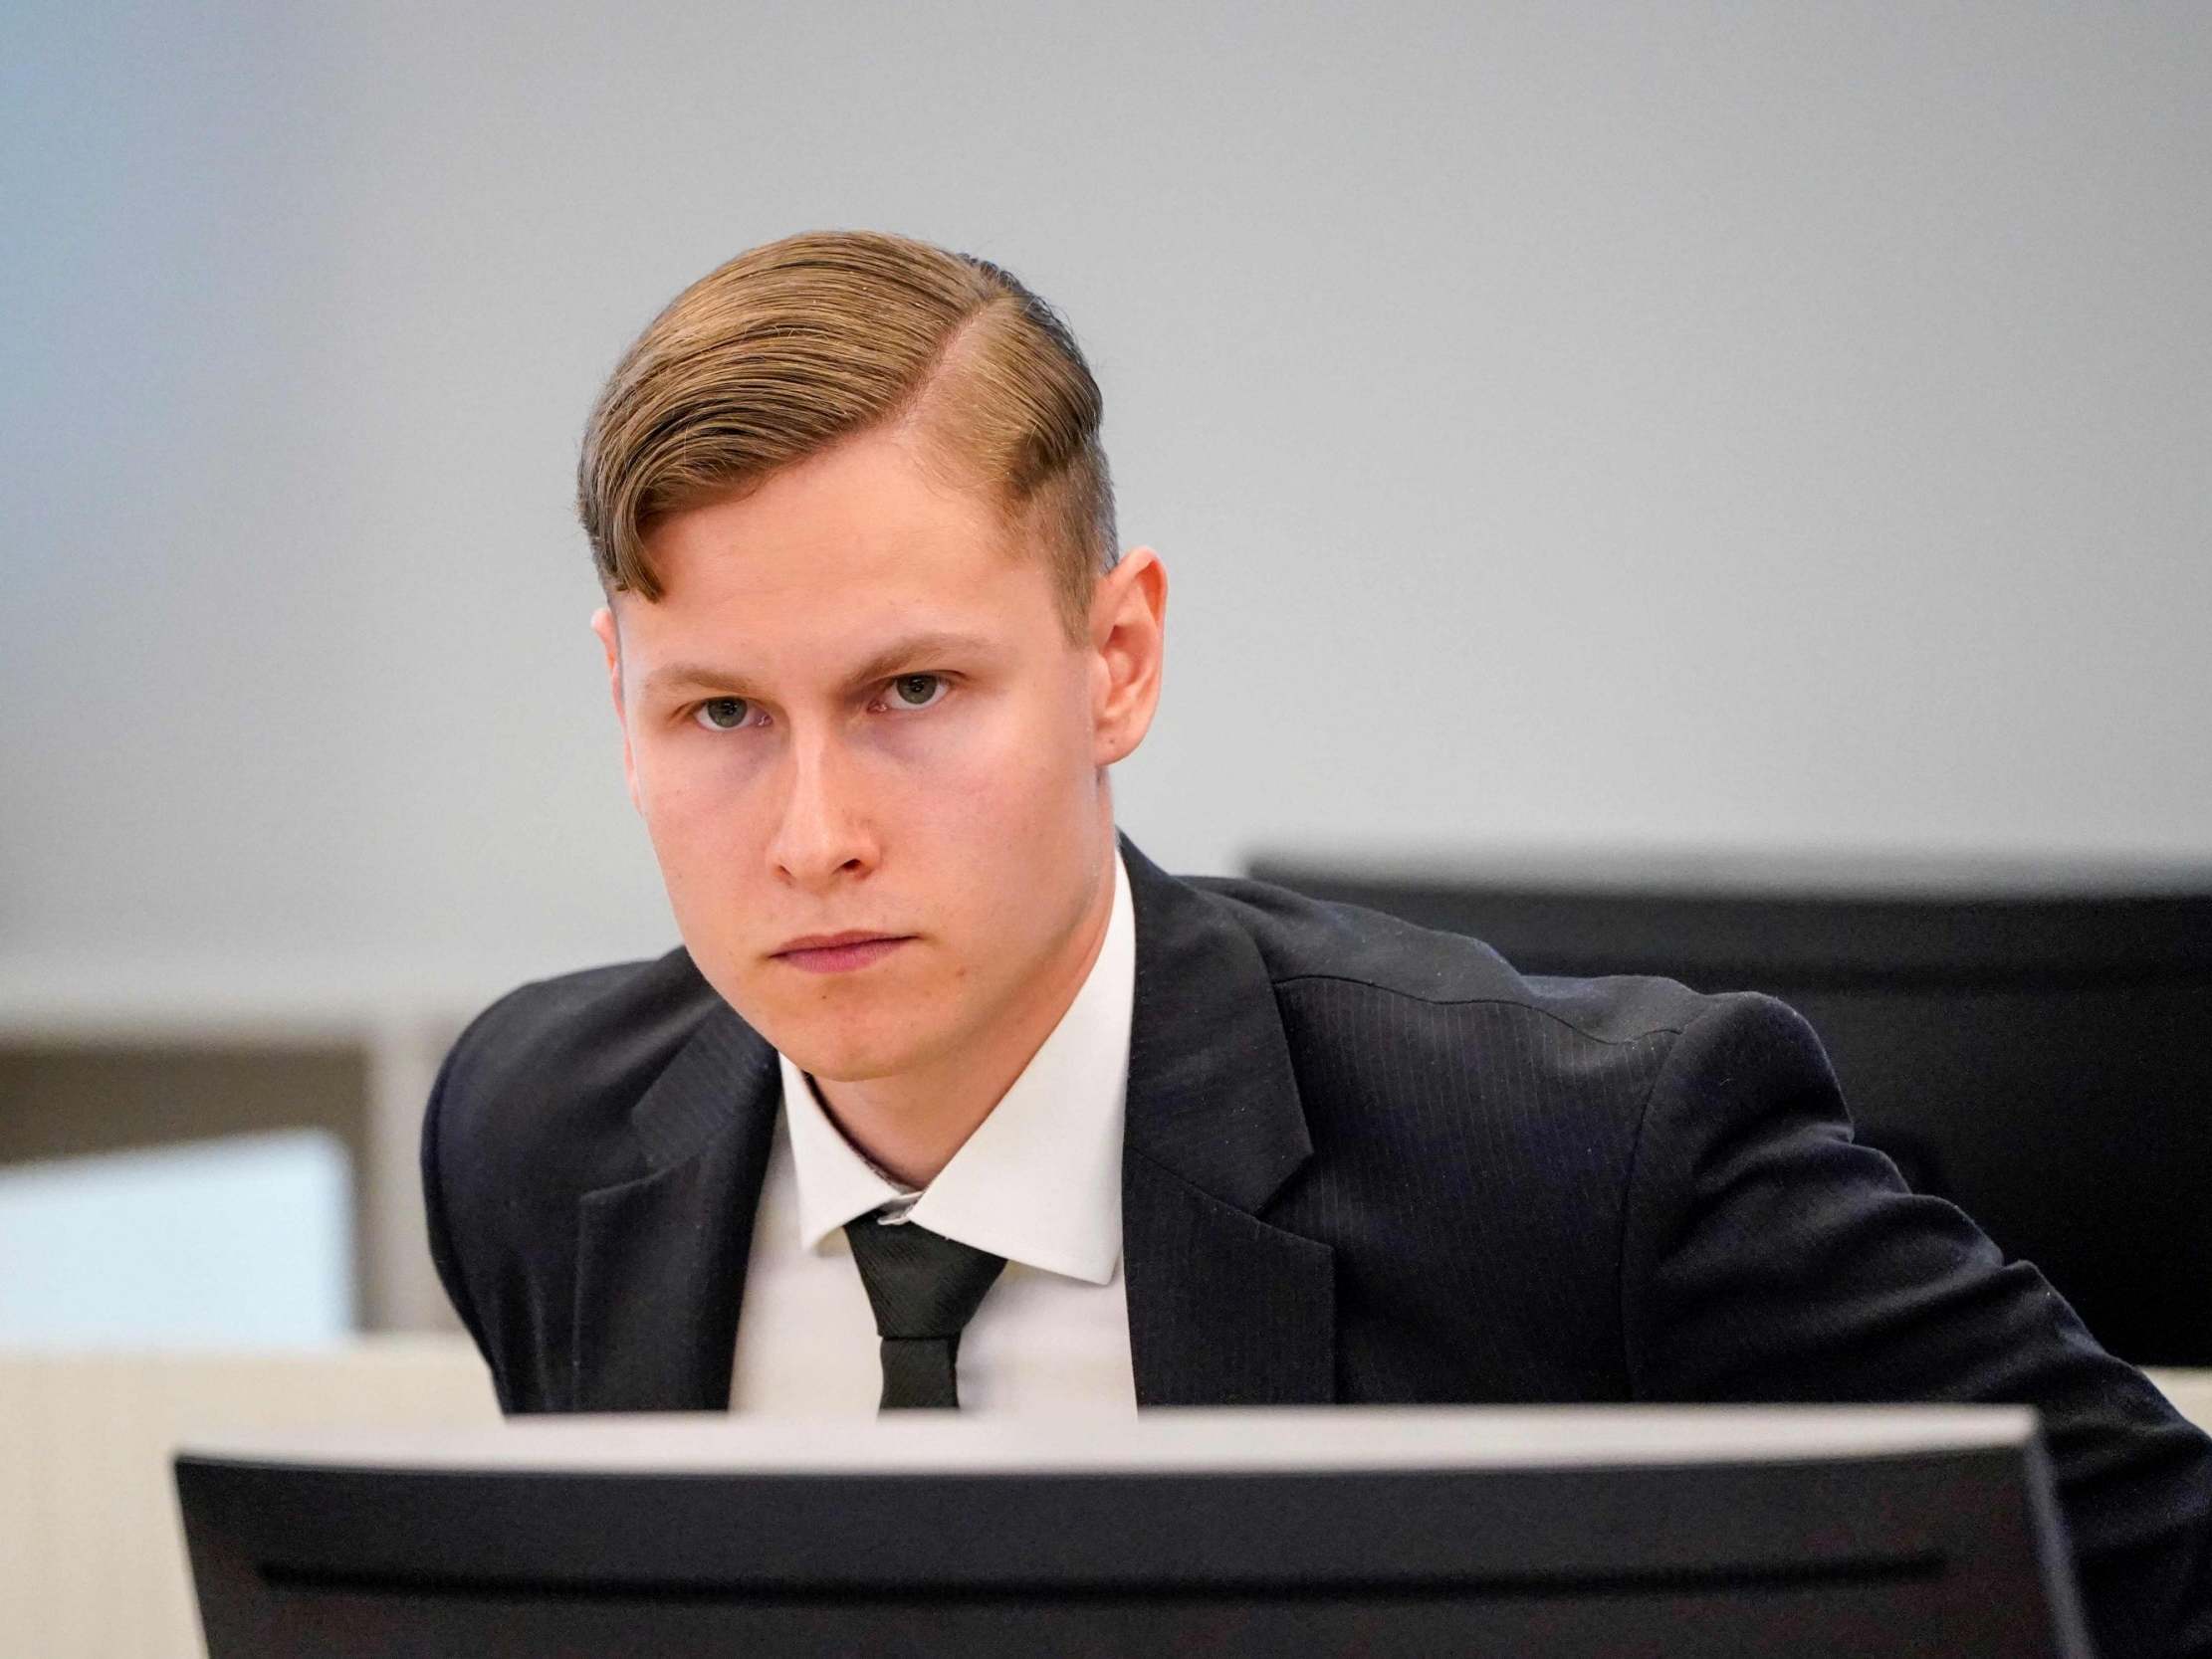 Manshaus at the start of his trial at Asker and Baerum district court, outside Oslo (NTB Scanpix/AFP/Getty)